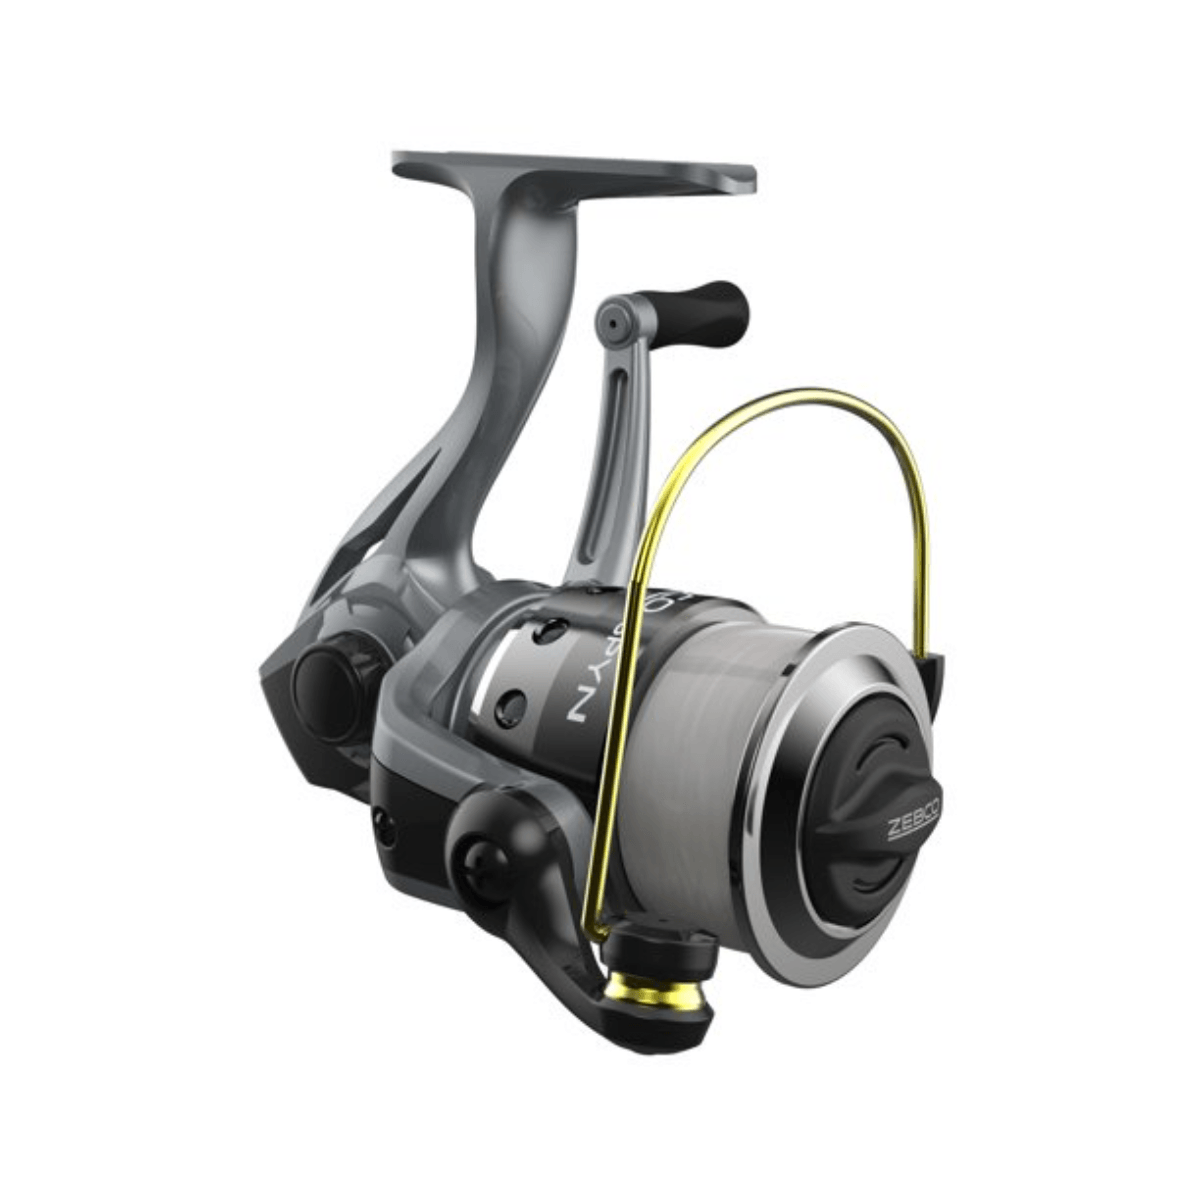 Zebco Spyn Spinning Fishing Reel, 3 Bearings (2 + Clutch), Instant  Anti-Reverse with Front-Adjustable Drag, All-Metal Gears